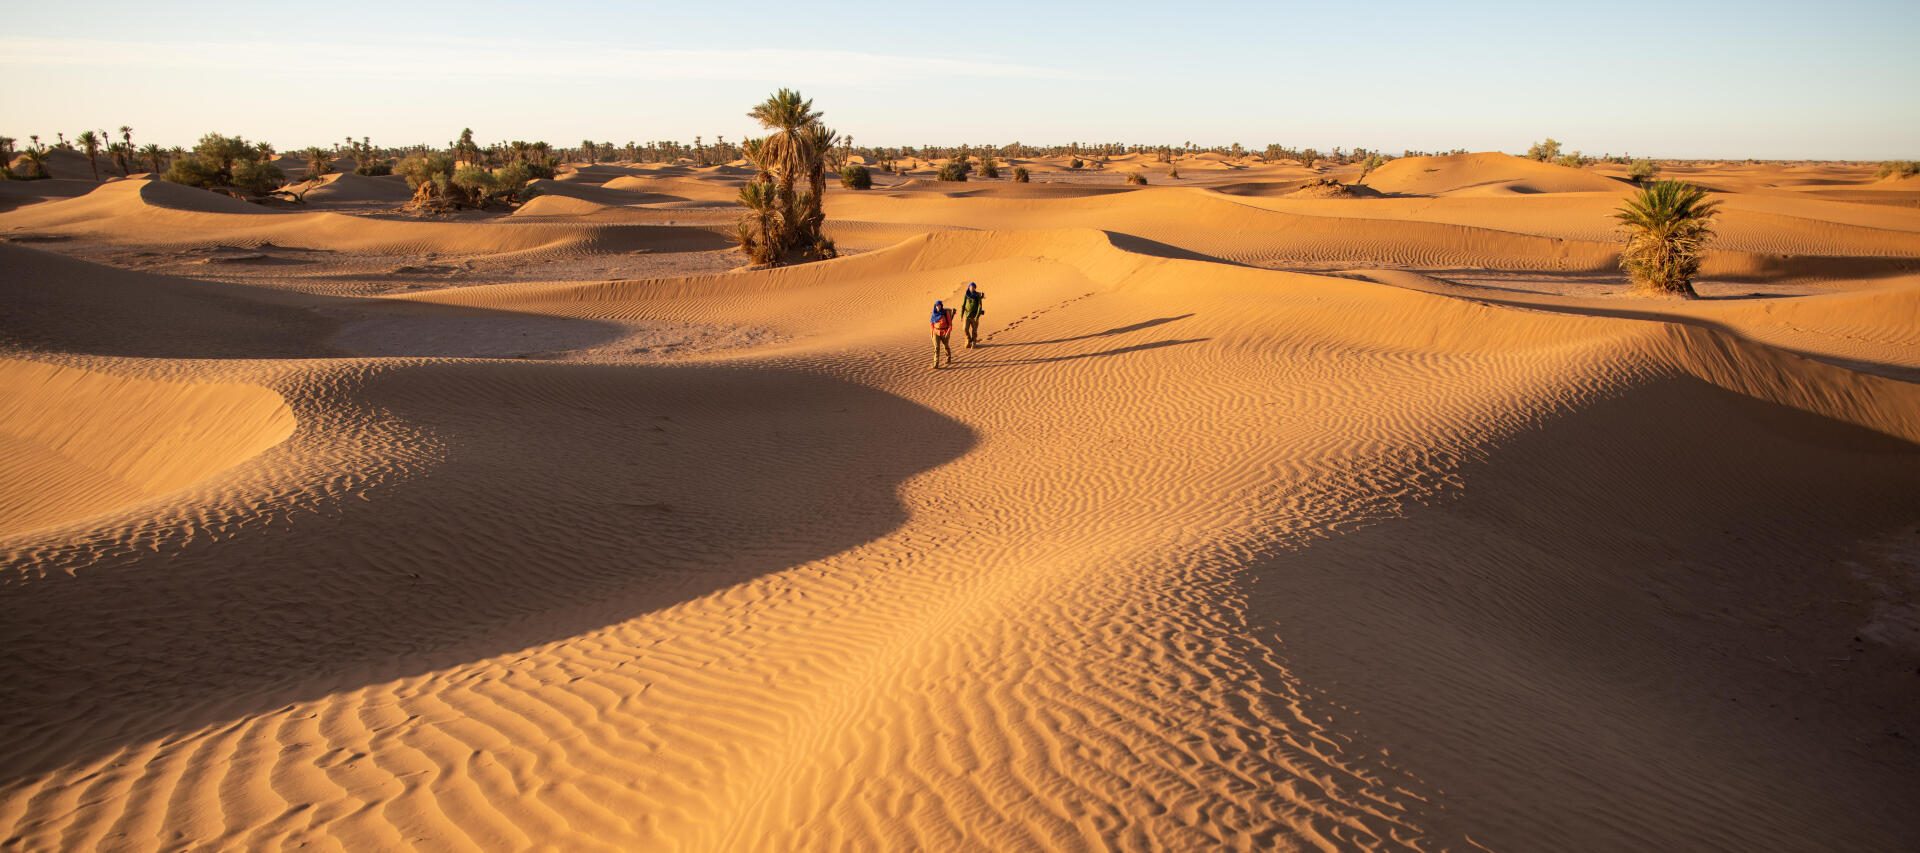 Trekking from ouarzazate in the desert of Morocco to explore ouled driss